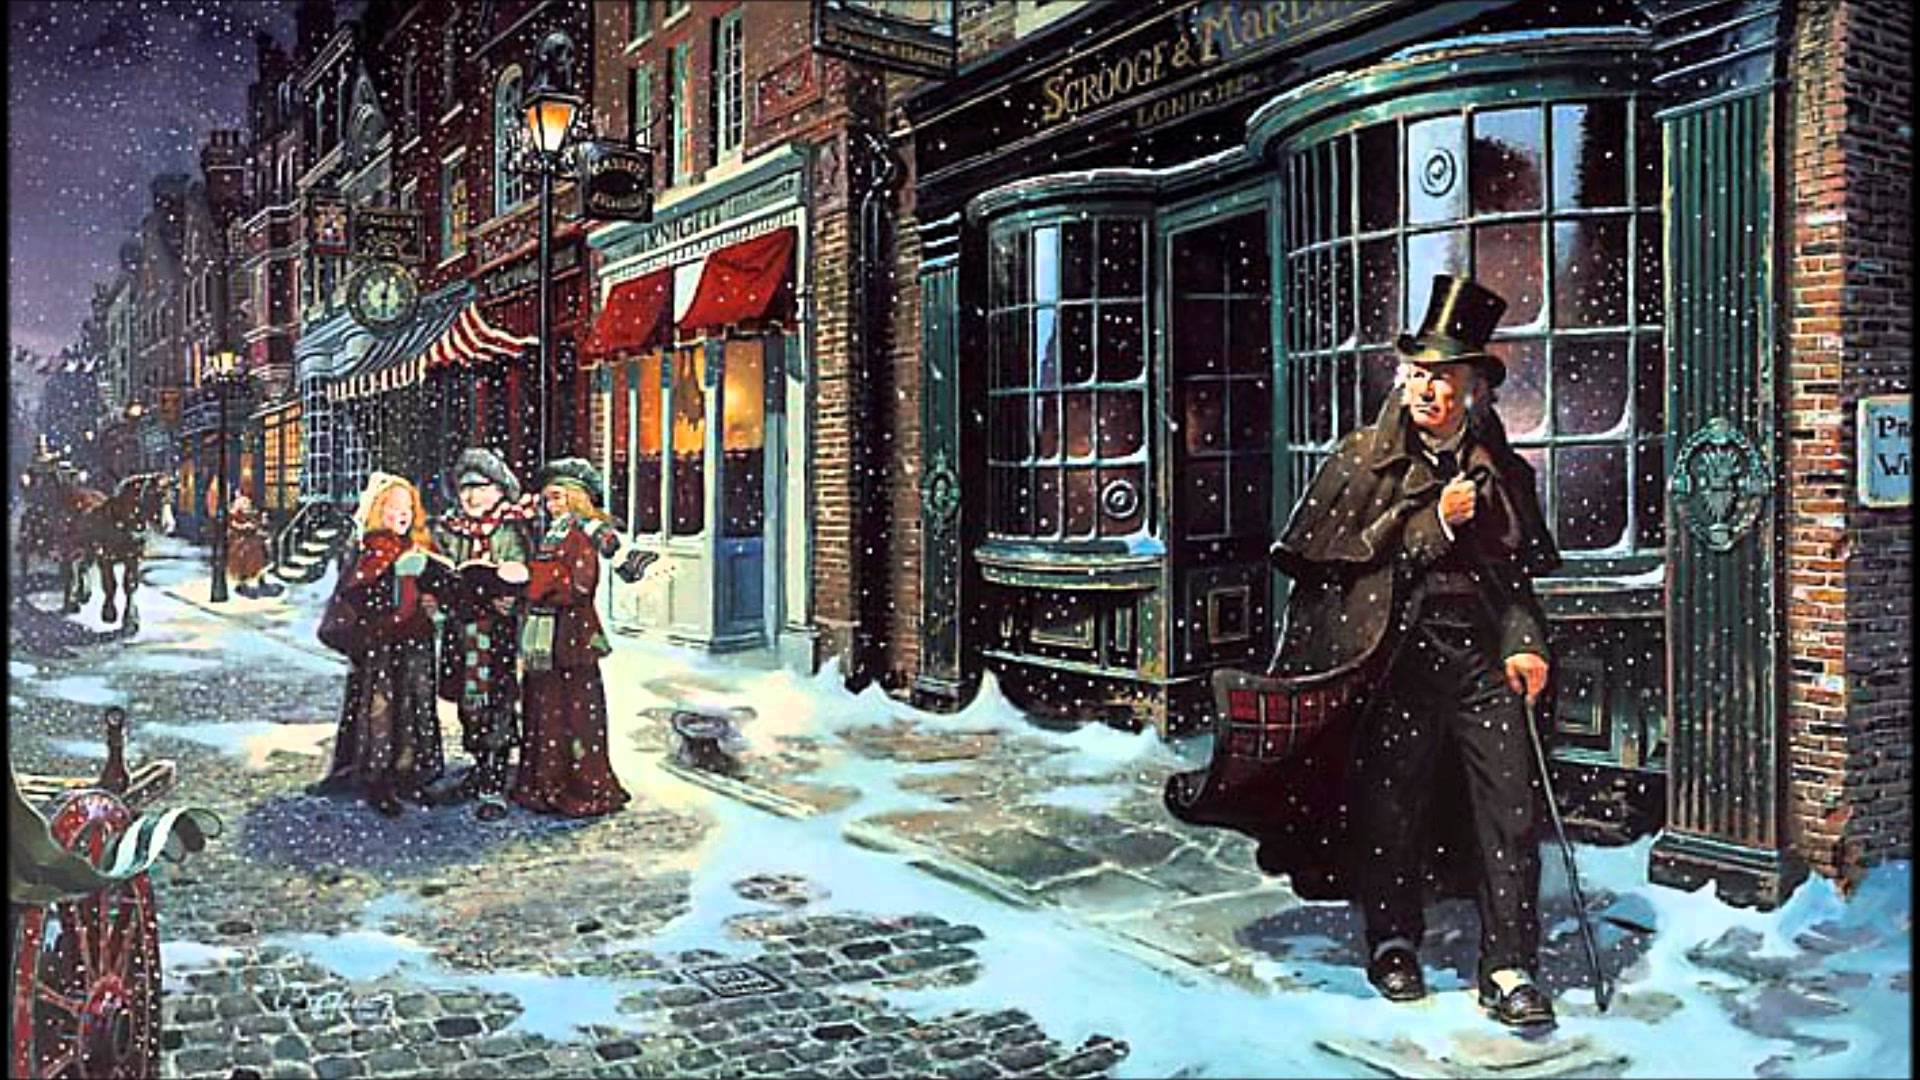 Ebenezer Scrooge- The Iconic Character From A Christmas Carol Background